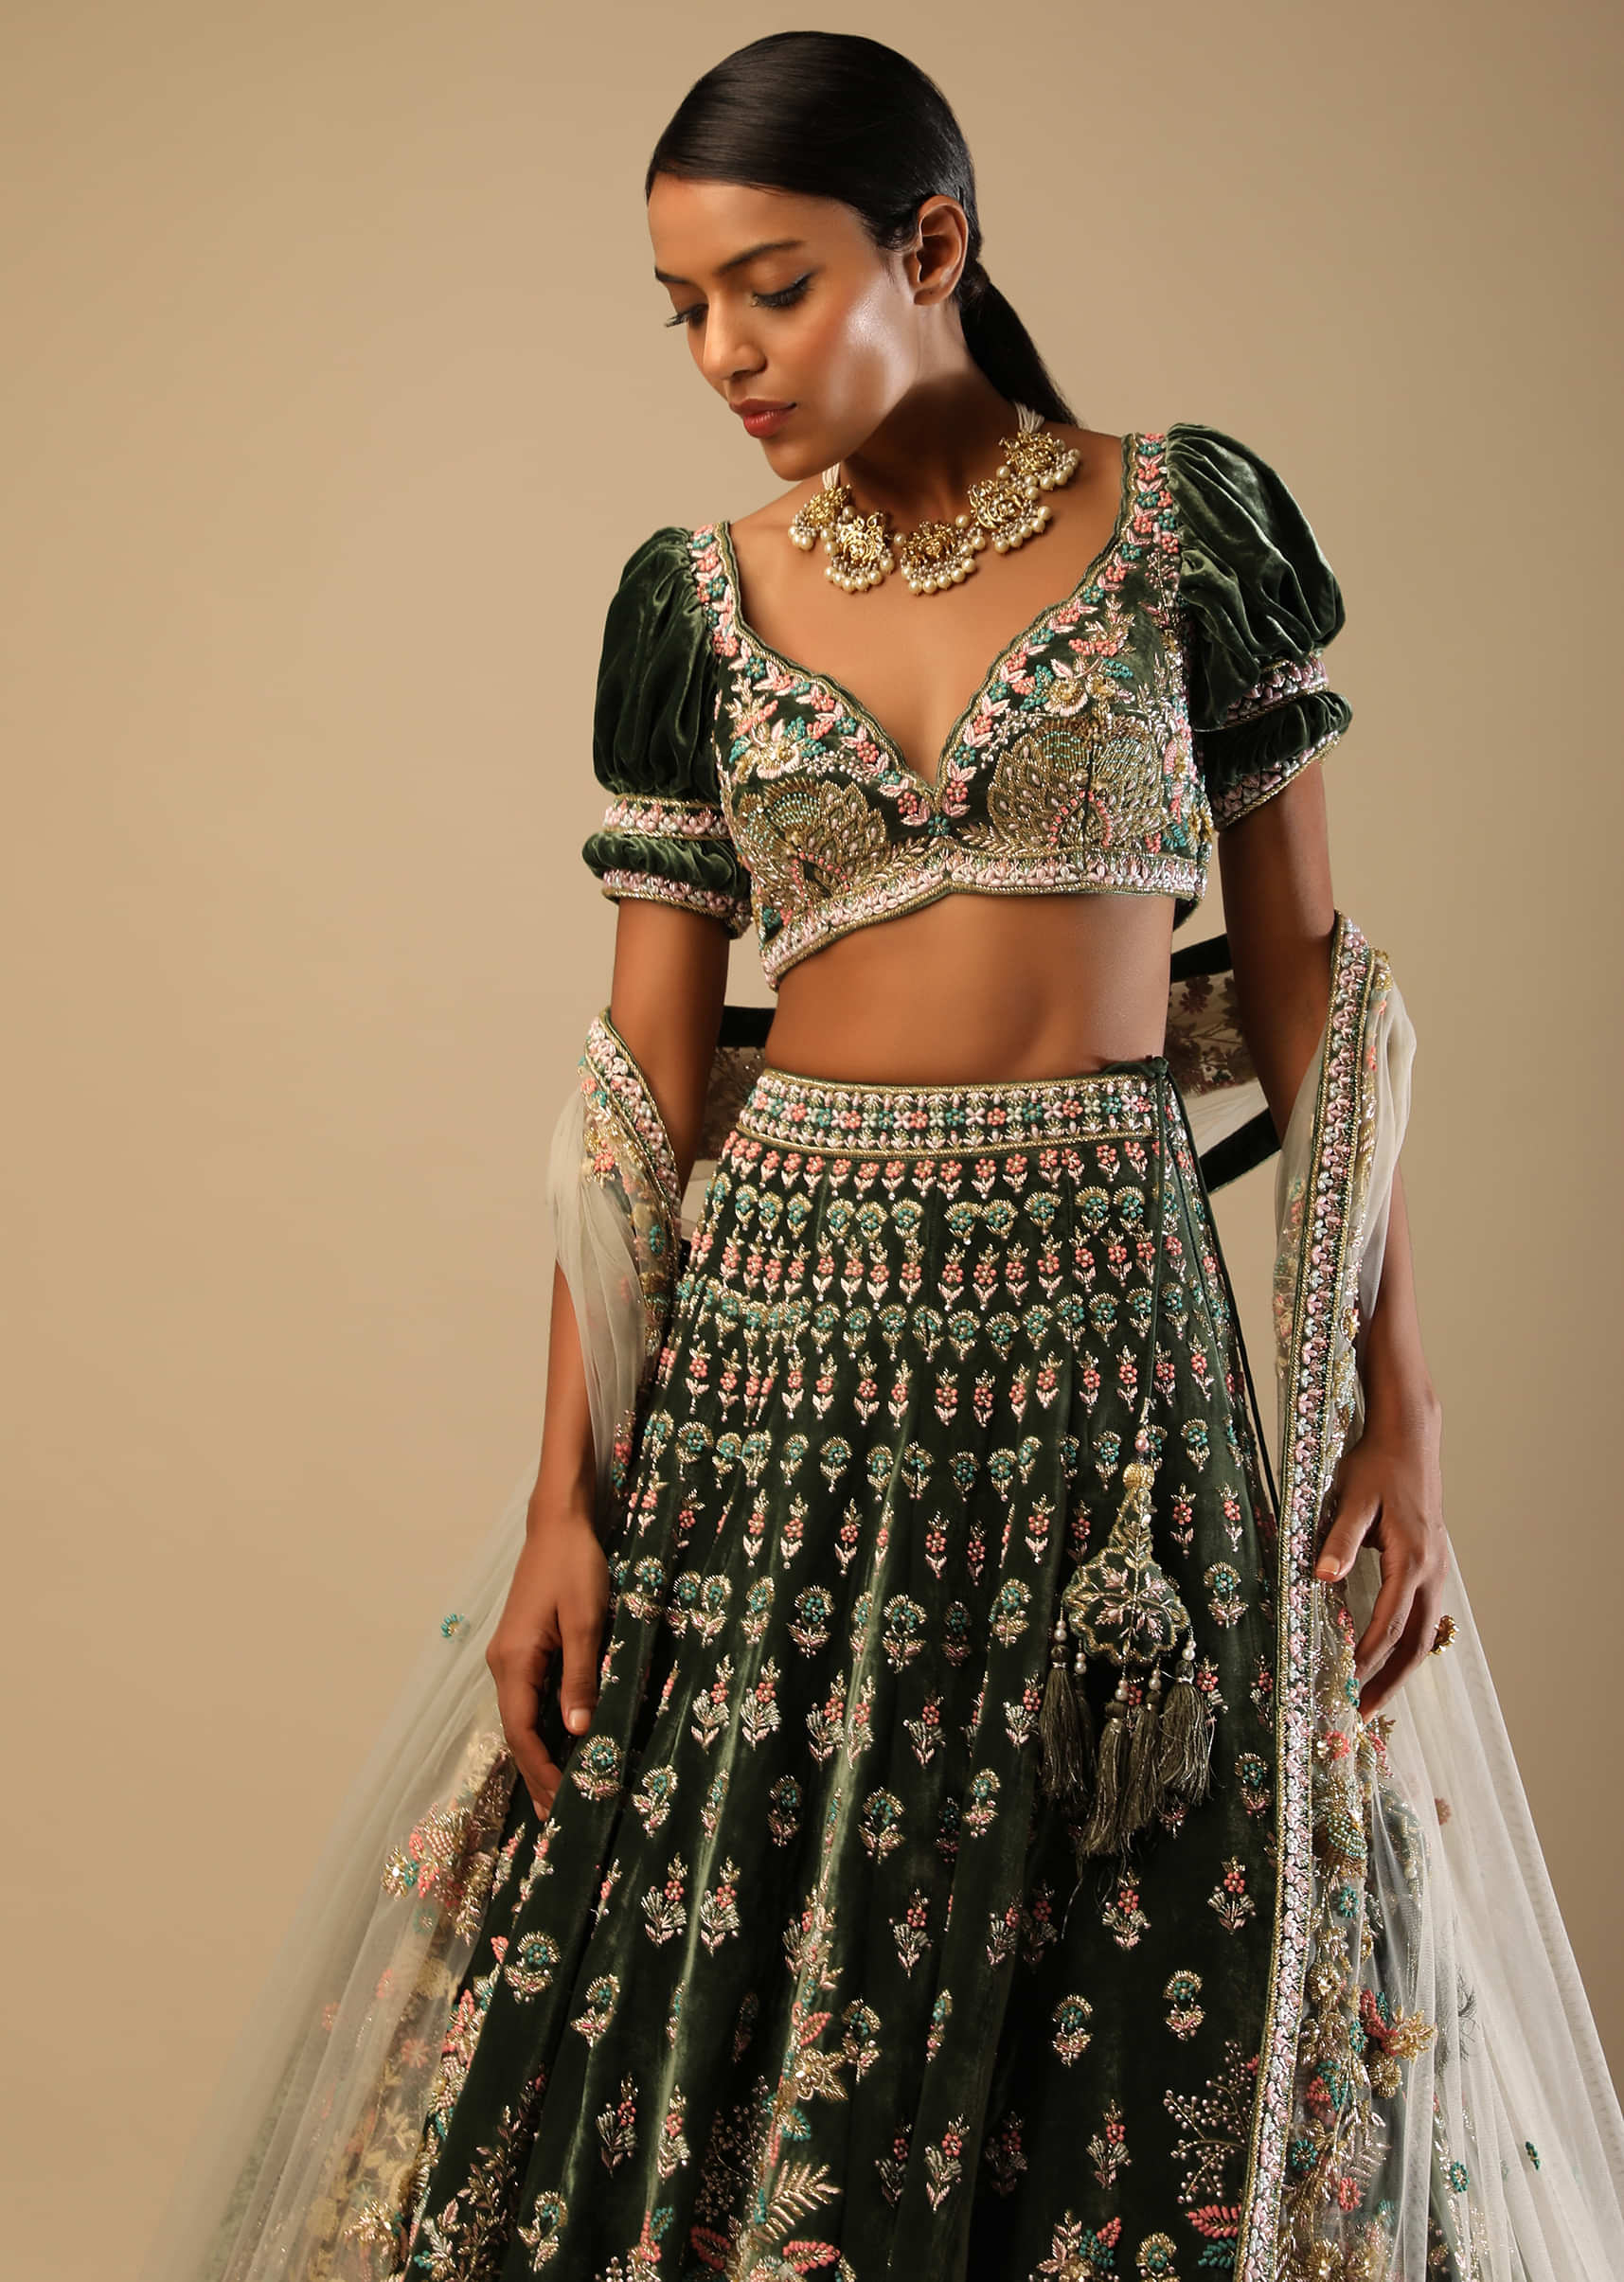 Palace Green Lehenga Choli In Velvet With Short Puff Sleeves And Multi Colored Hand Embroidery In Floral And Geometric Motifs 